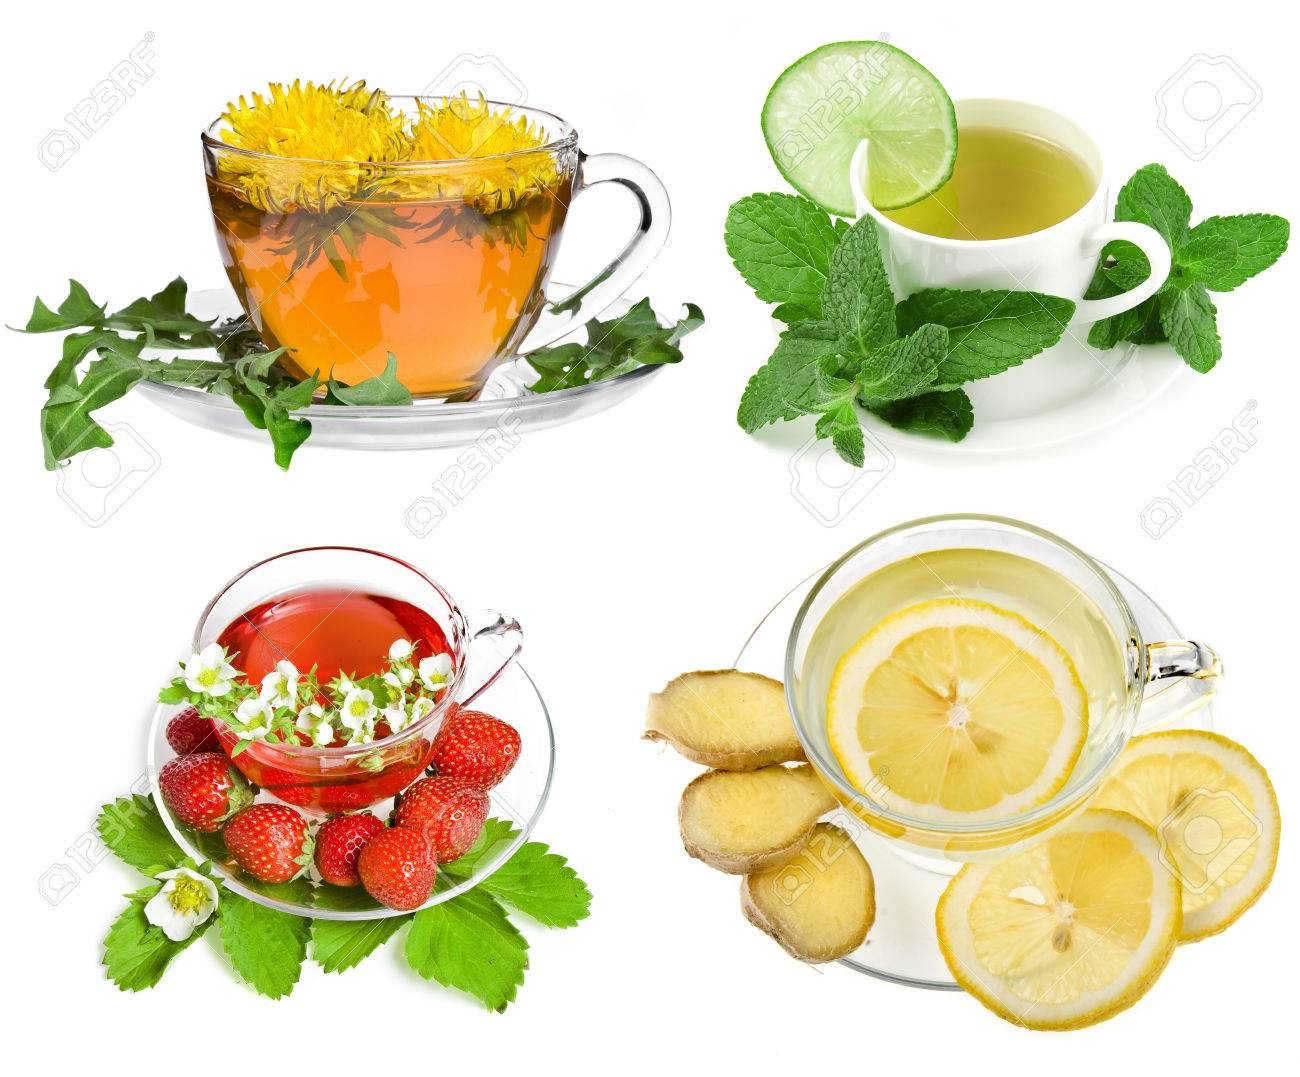 Herbal and Fruit Teas&amp;ndash; Growing Popularity and Emer'